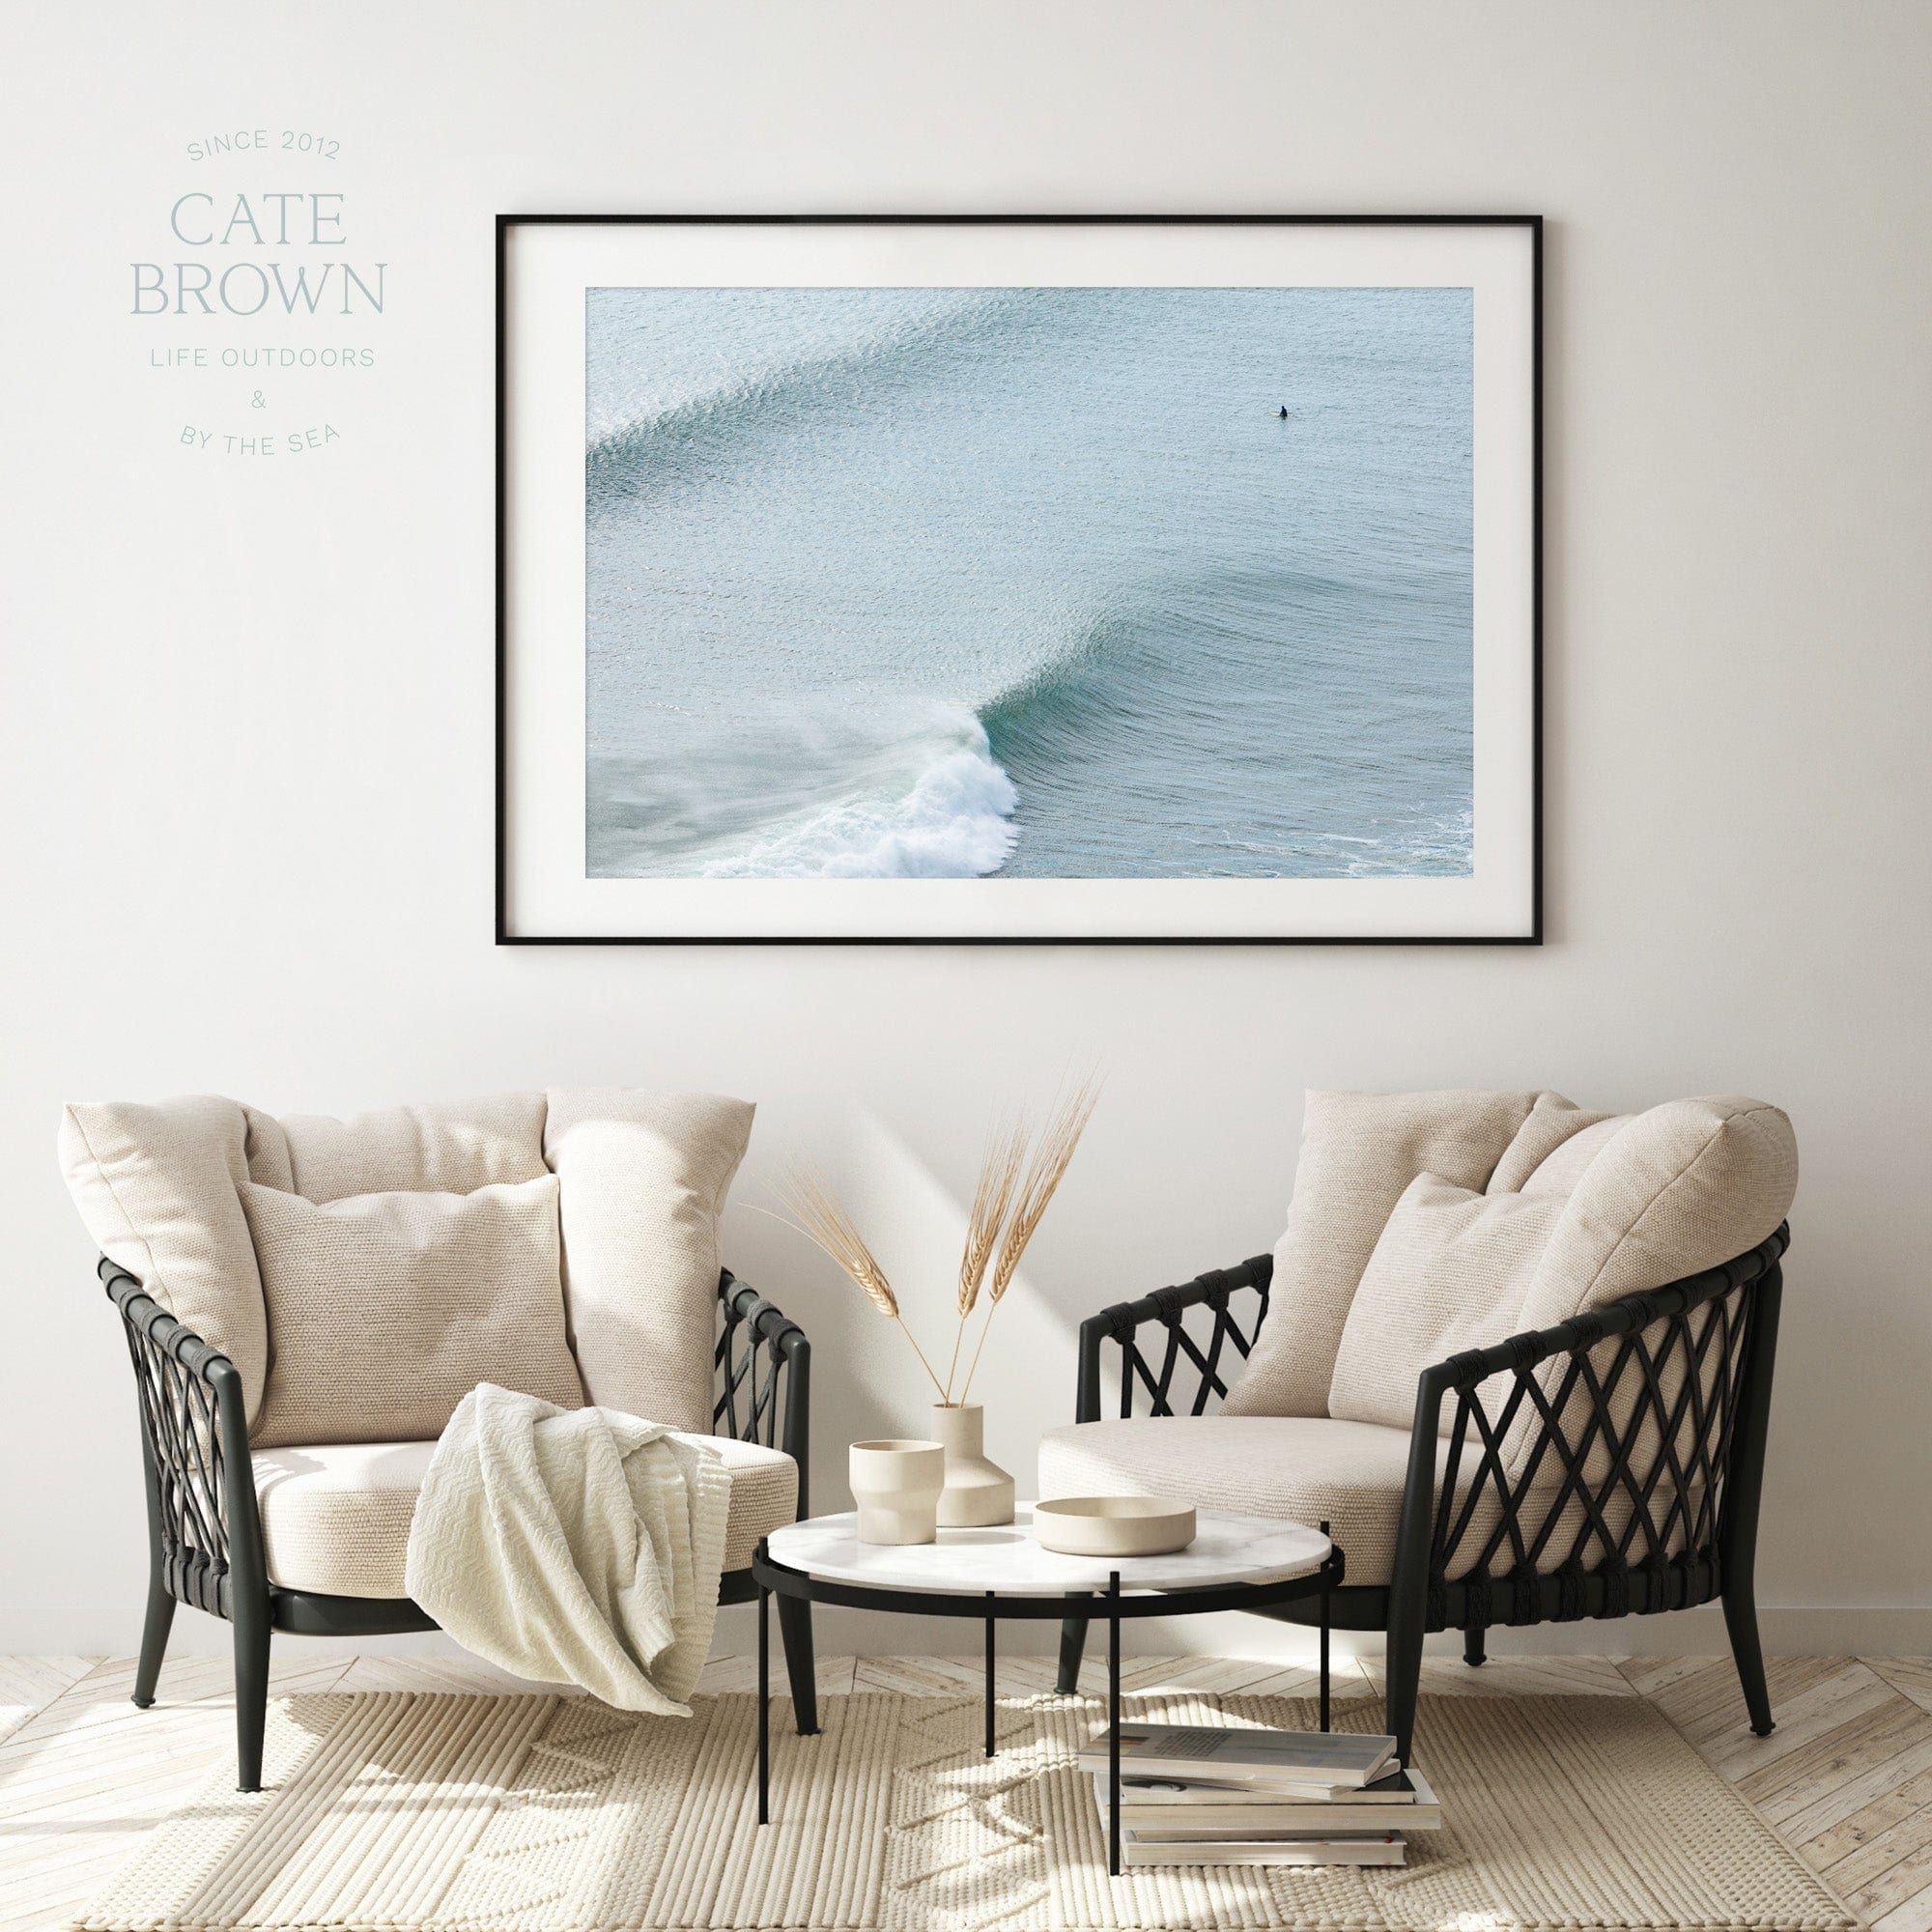 Cate Brown Photo Fine Art Print / 8"x12" / None (Print Only) Next One  //  Aerial Photography Made to Order Ocean Fine Art